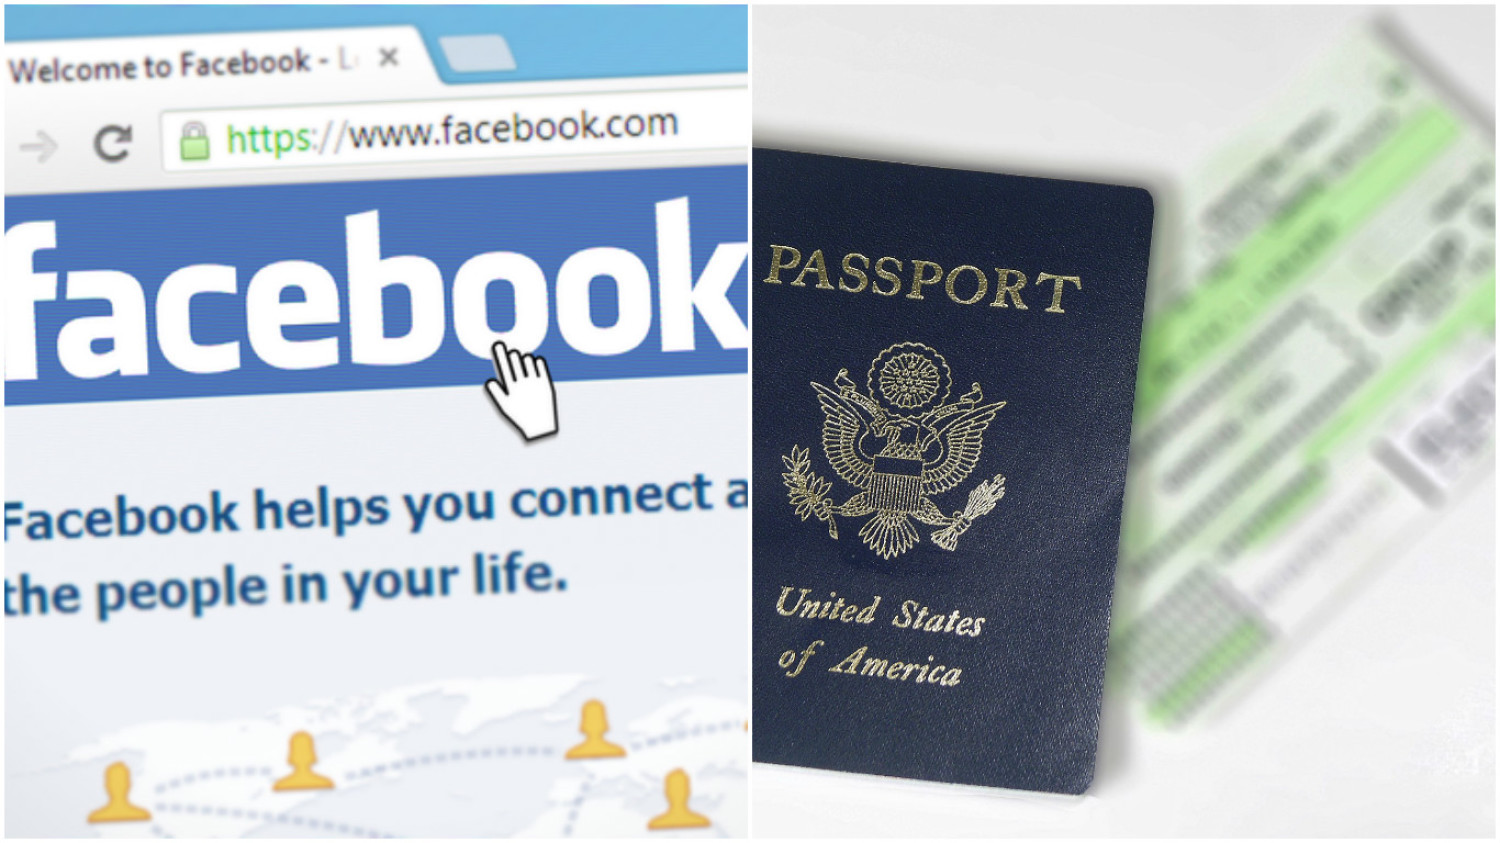 Facebook account name will now be a required element of US visa application